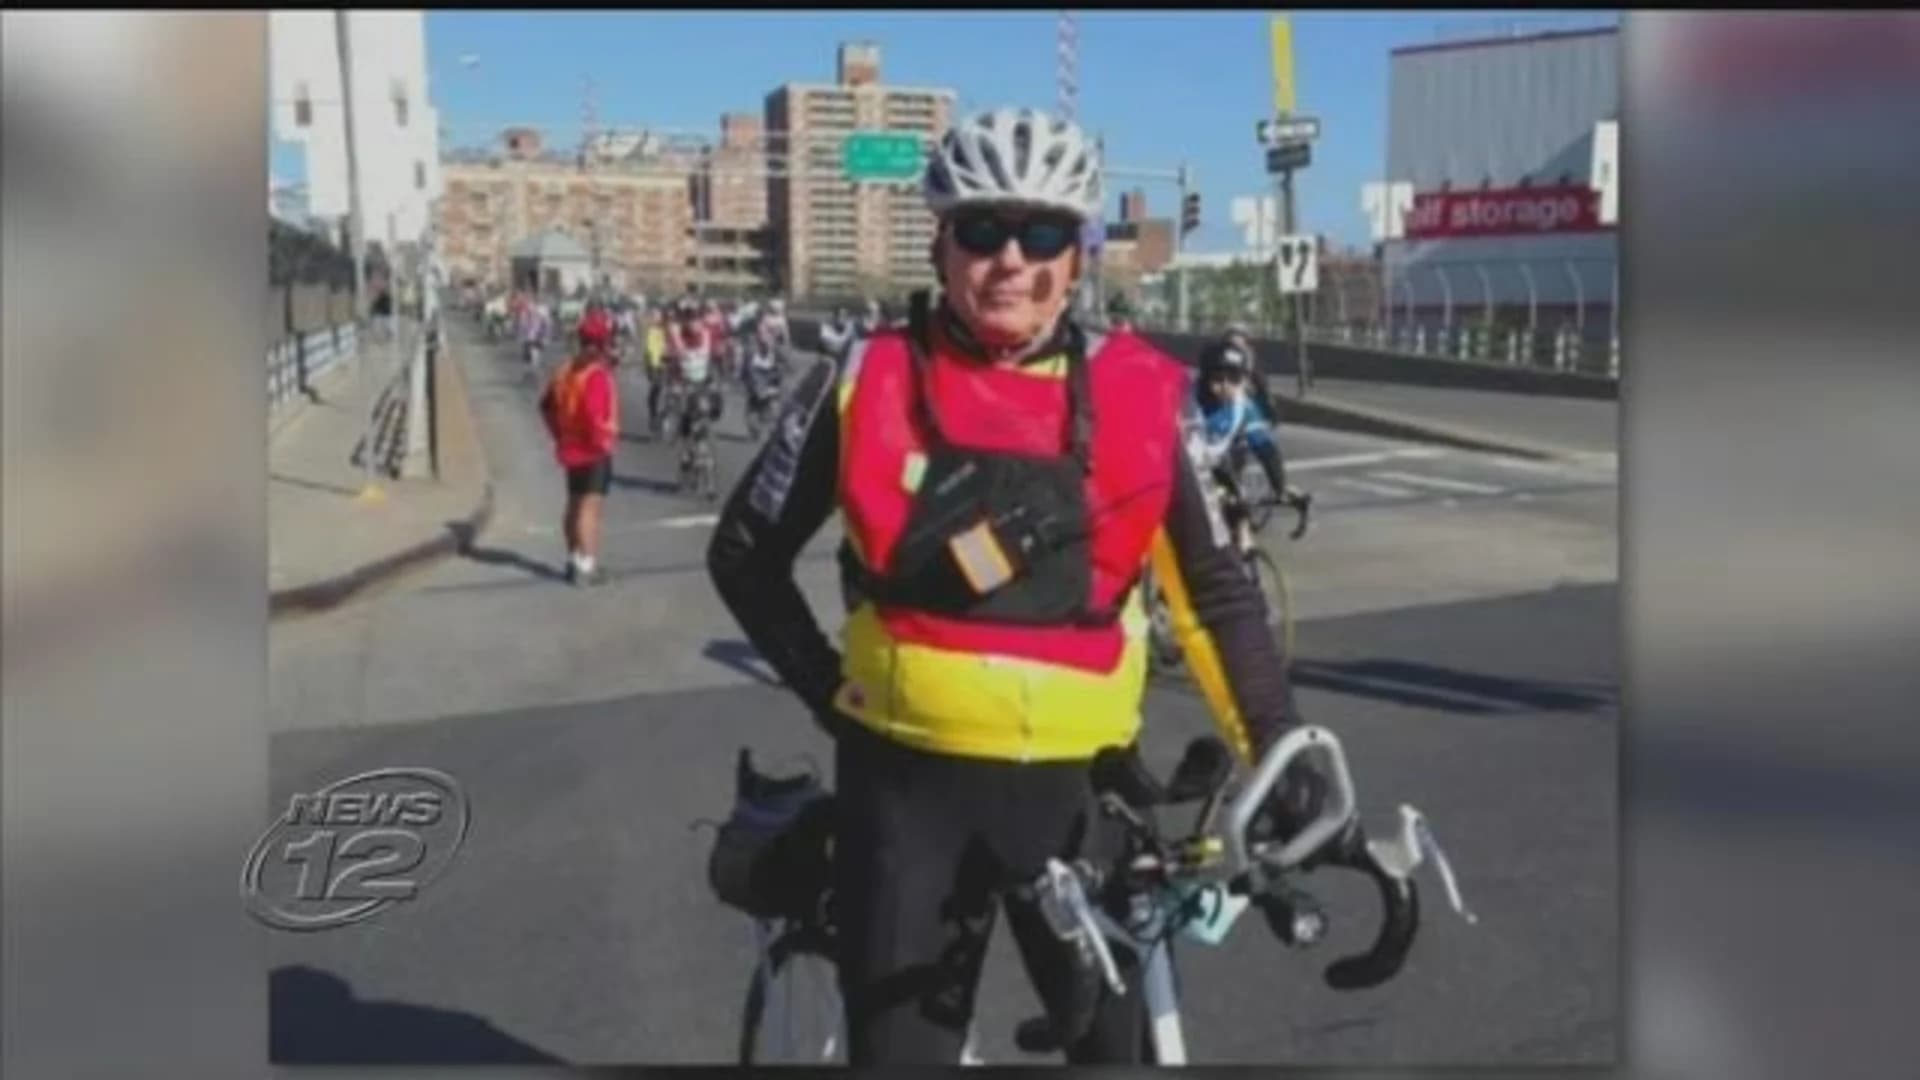 Hit-and-run driver fatally strikes well-known cyclist